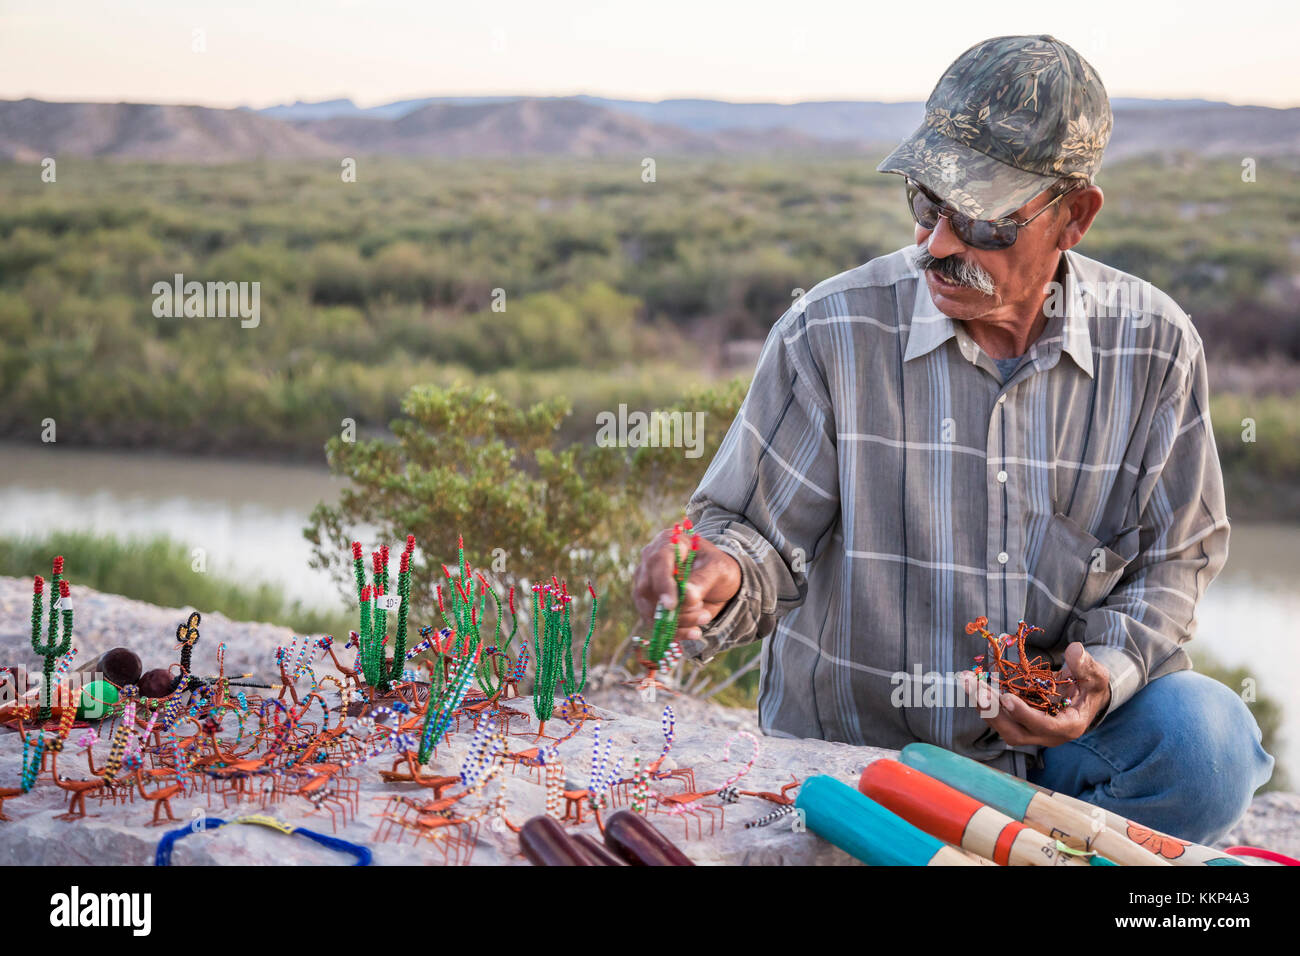 Big Bend National Park, Texas - A man from the Mexican town of Boquillas del Carmen leaves handicrafts at a scenic overlook above the Rio Grande for t Stock Photo